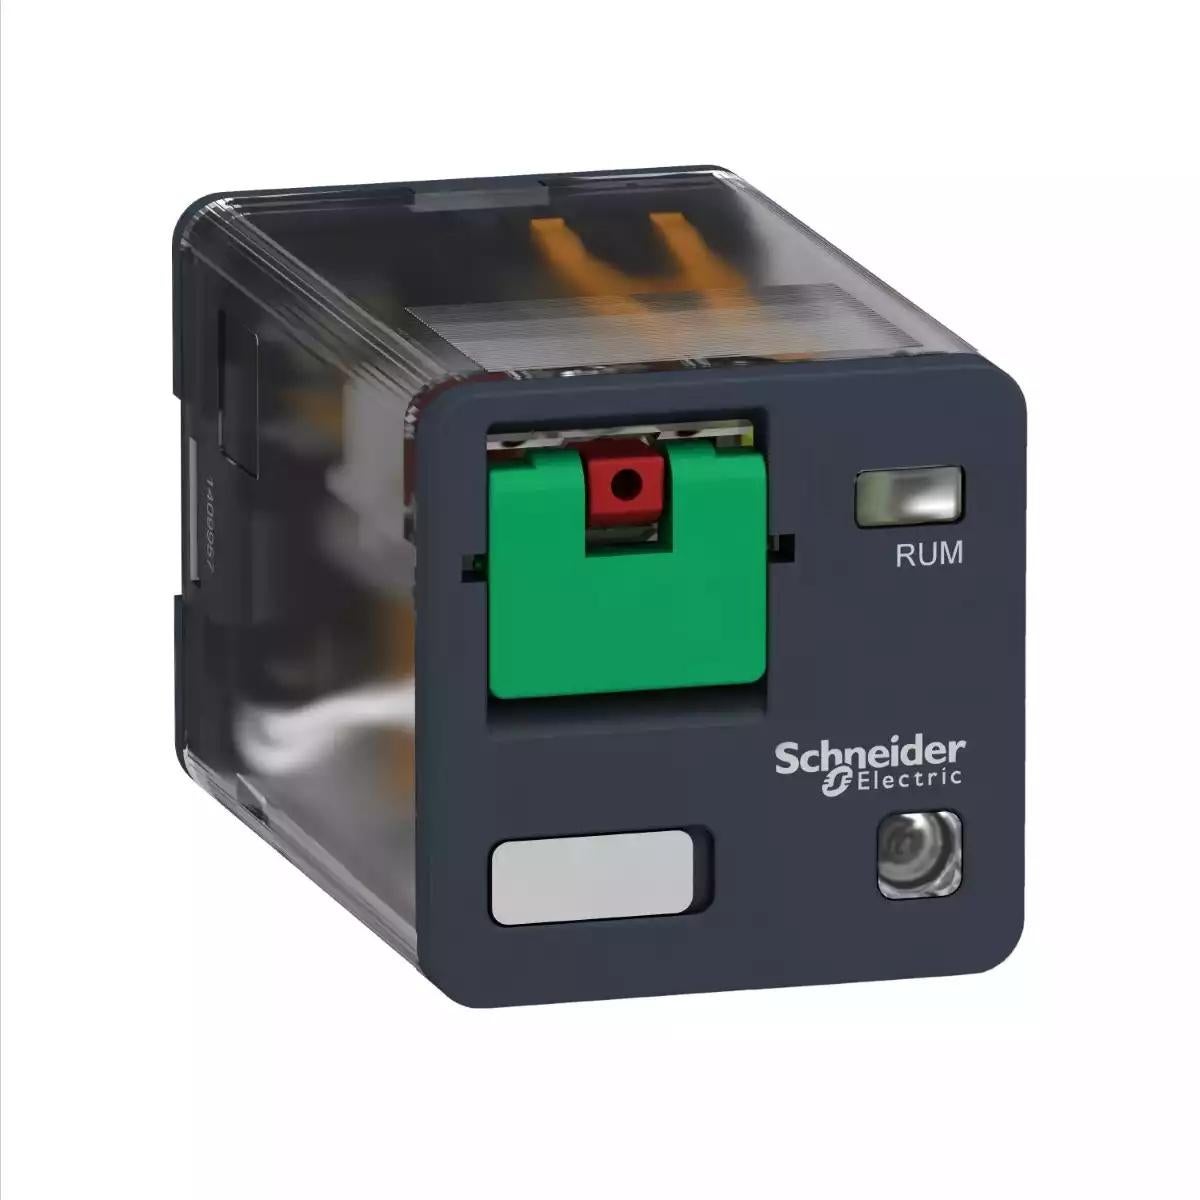 Schneider Electric universal plug-in relay - Zelio RUM - 3 C/O - 230 V AC - 10 A - with LED